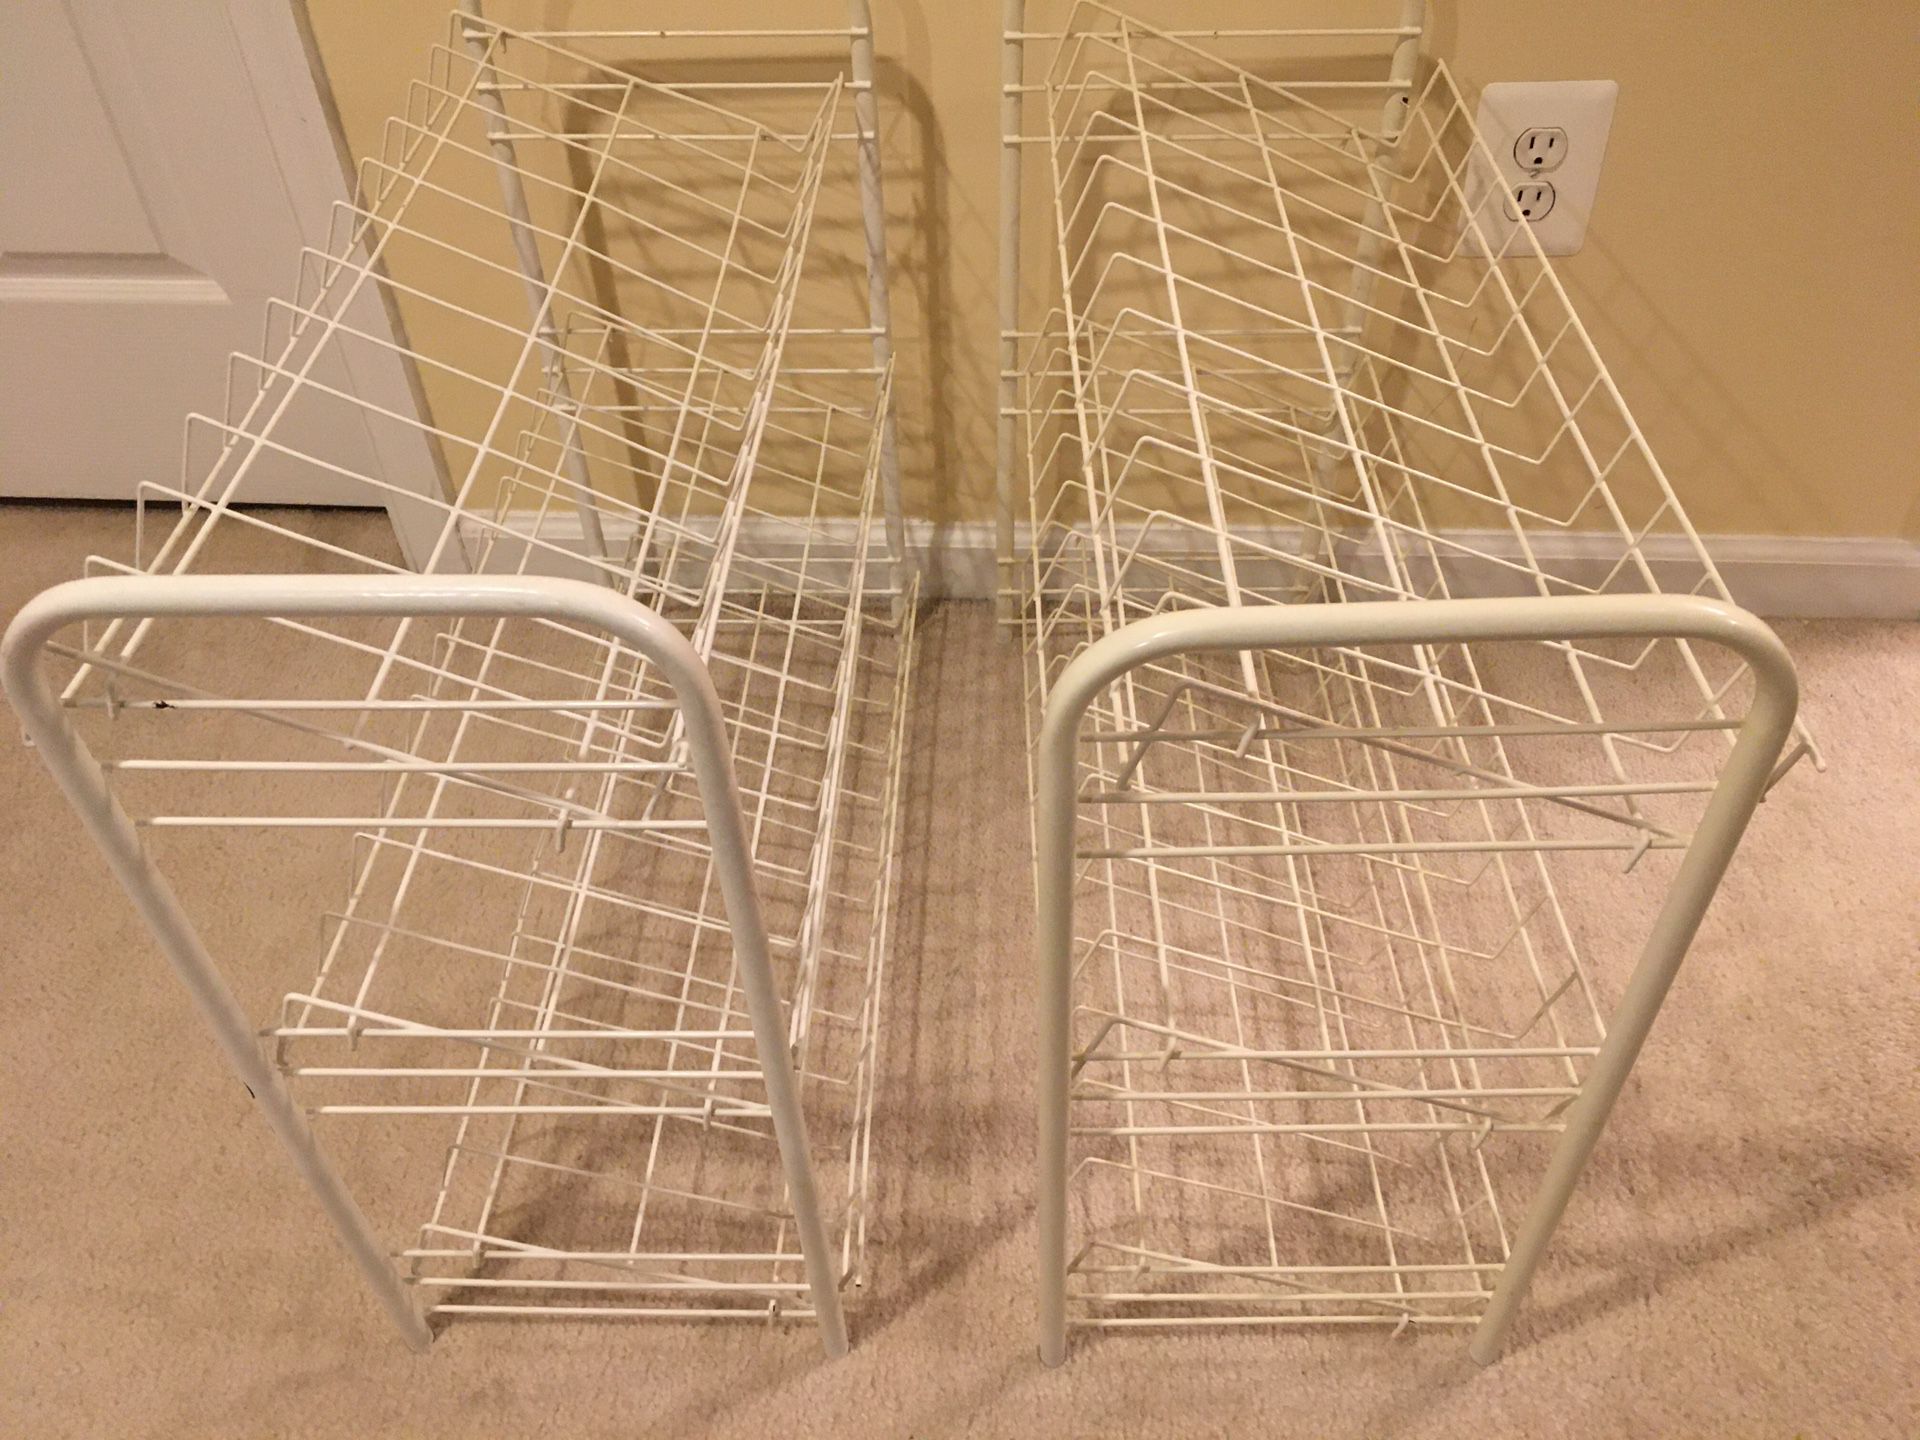 Nice Shoe Rack: Only $15 for two